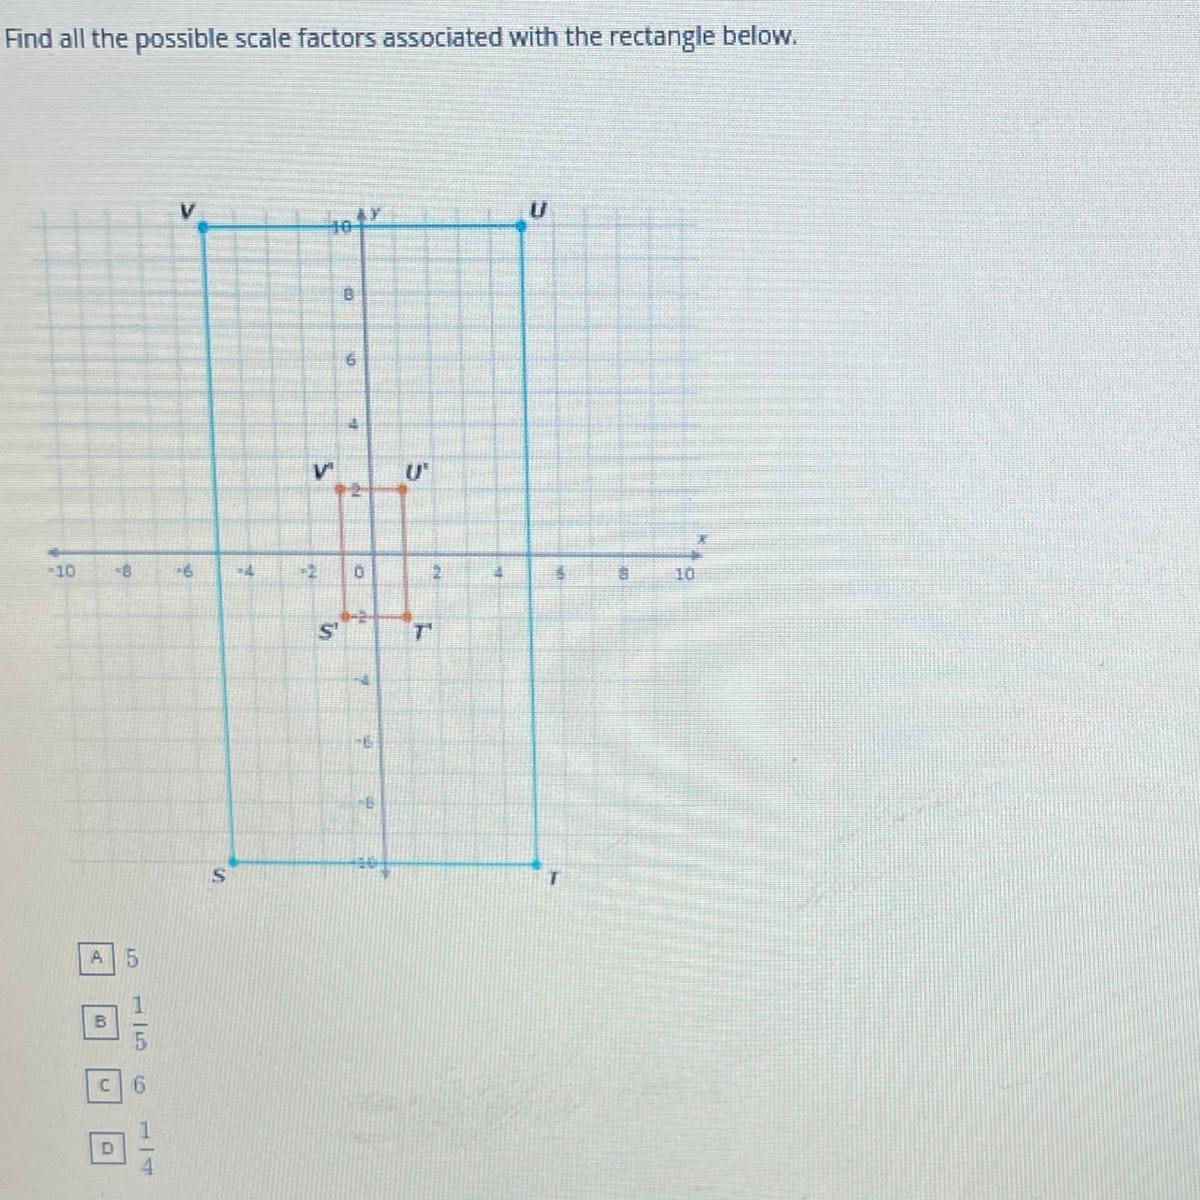 What Is The Possible Scale Factor For The Rectangle?